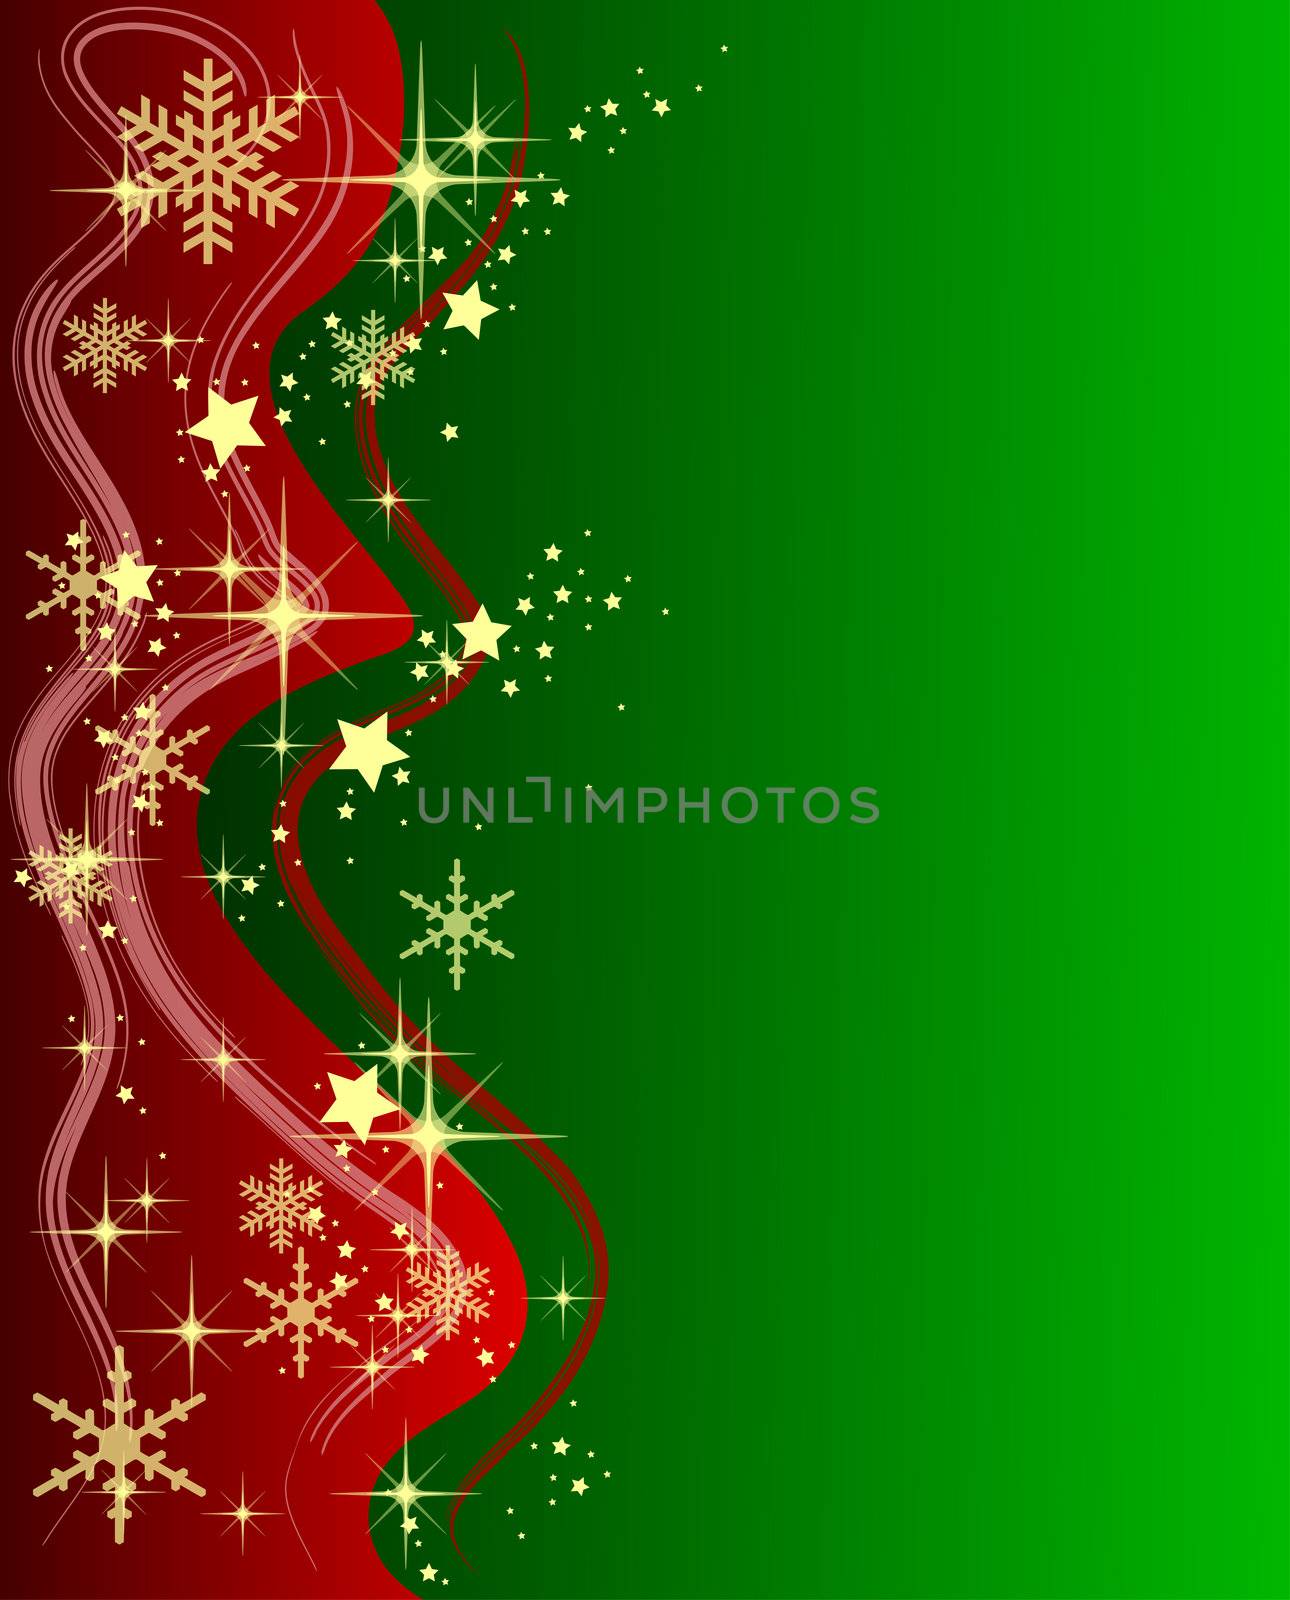 Illustration of a green Christmas Background with Stars